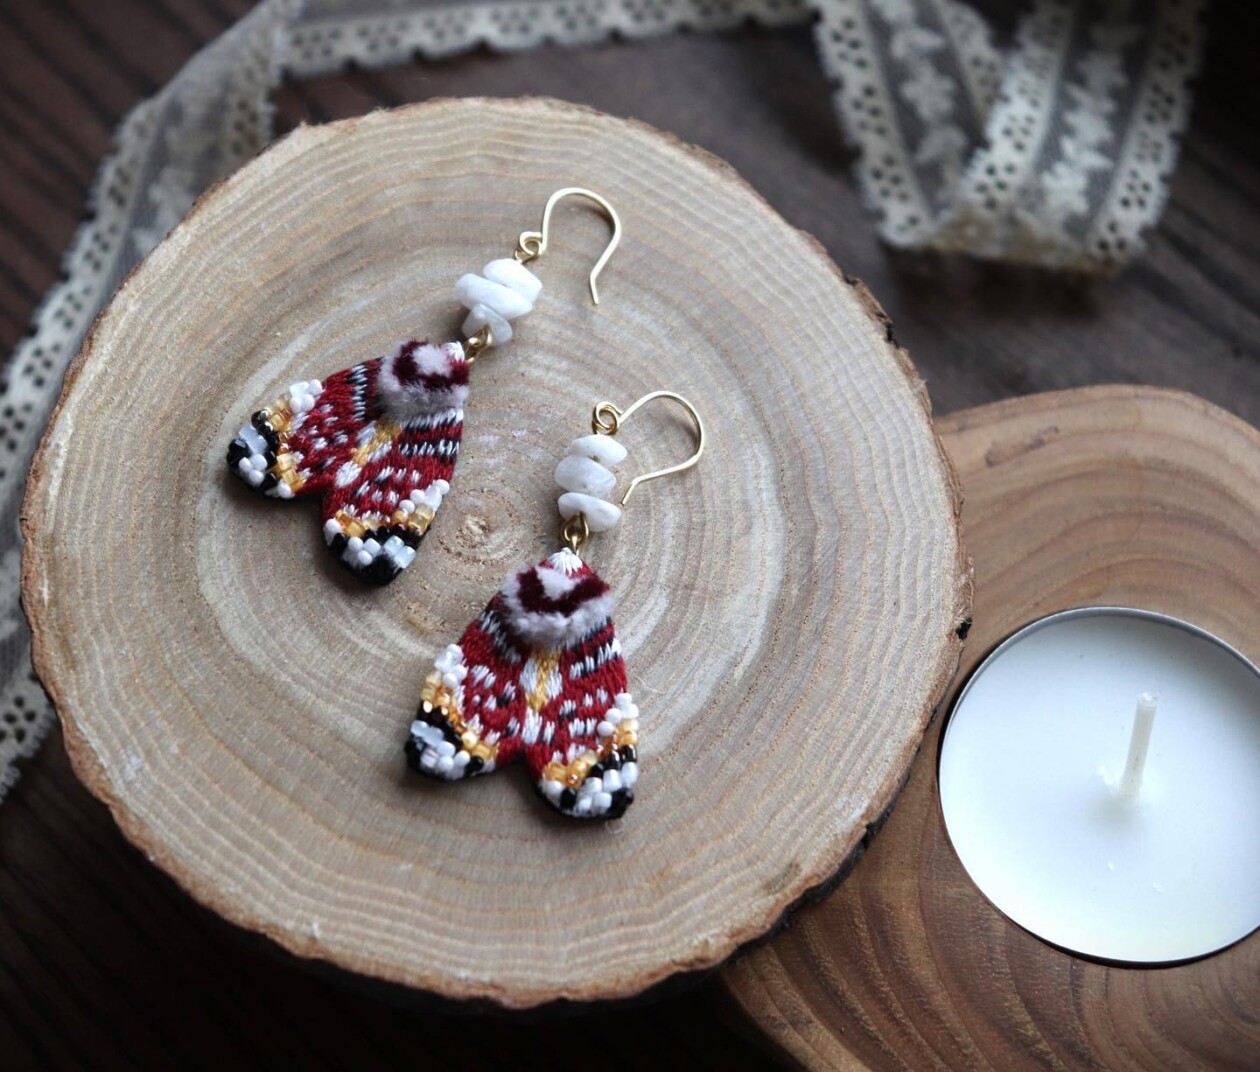 Eye Catching Handmade Embroidered Earrings By Vivaembr (25)